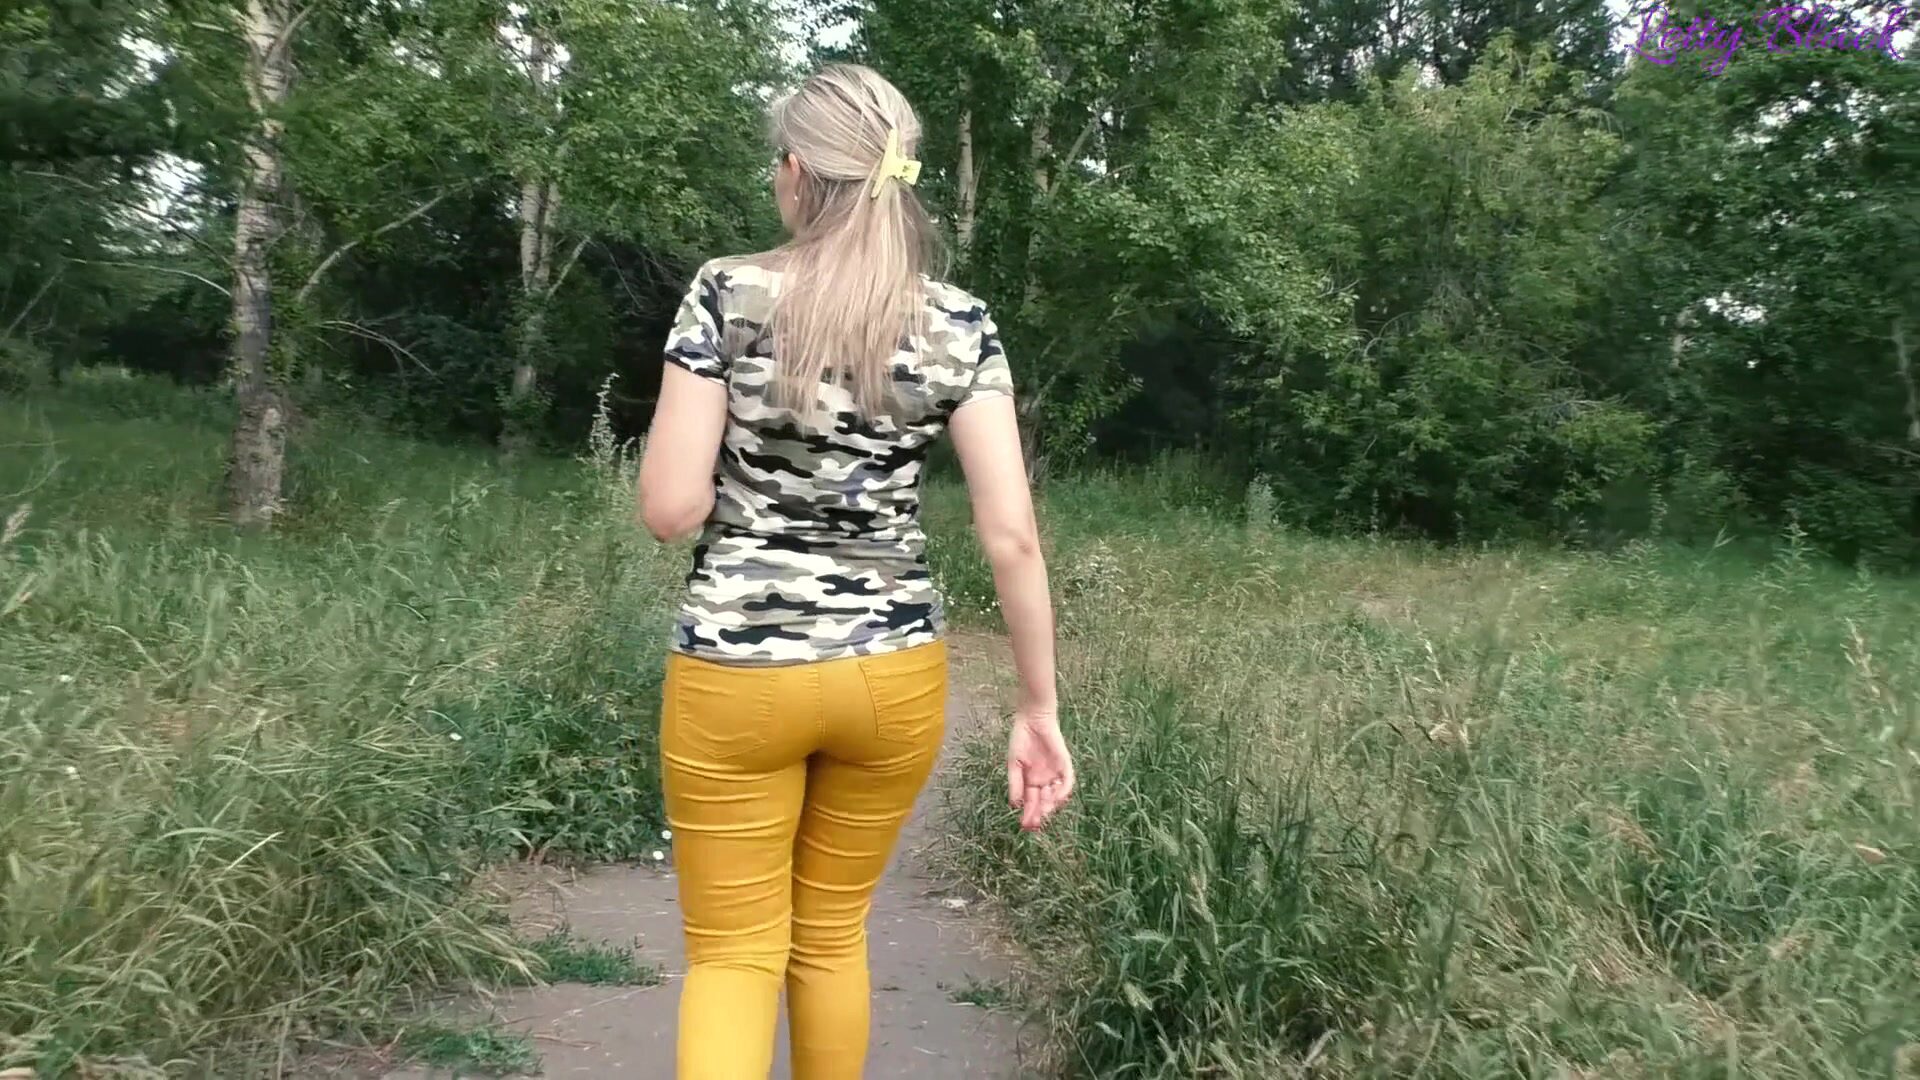 Quickie Fuck with Stranger in Park - Outdoor Cum in Mouth